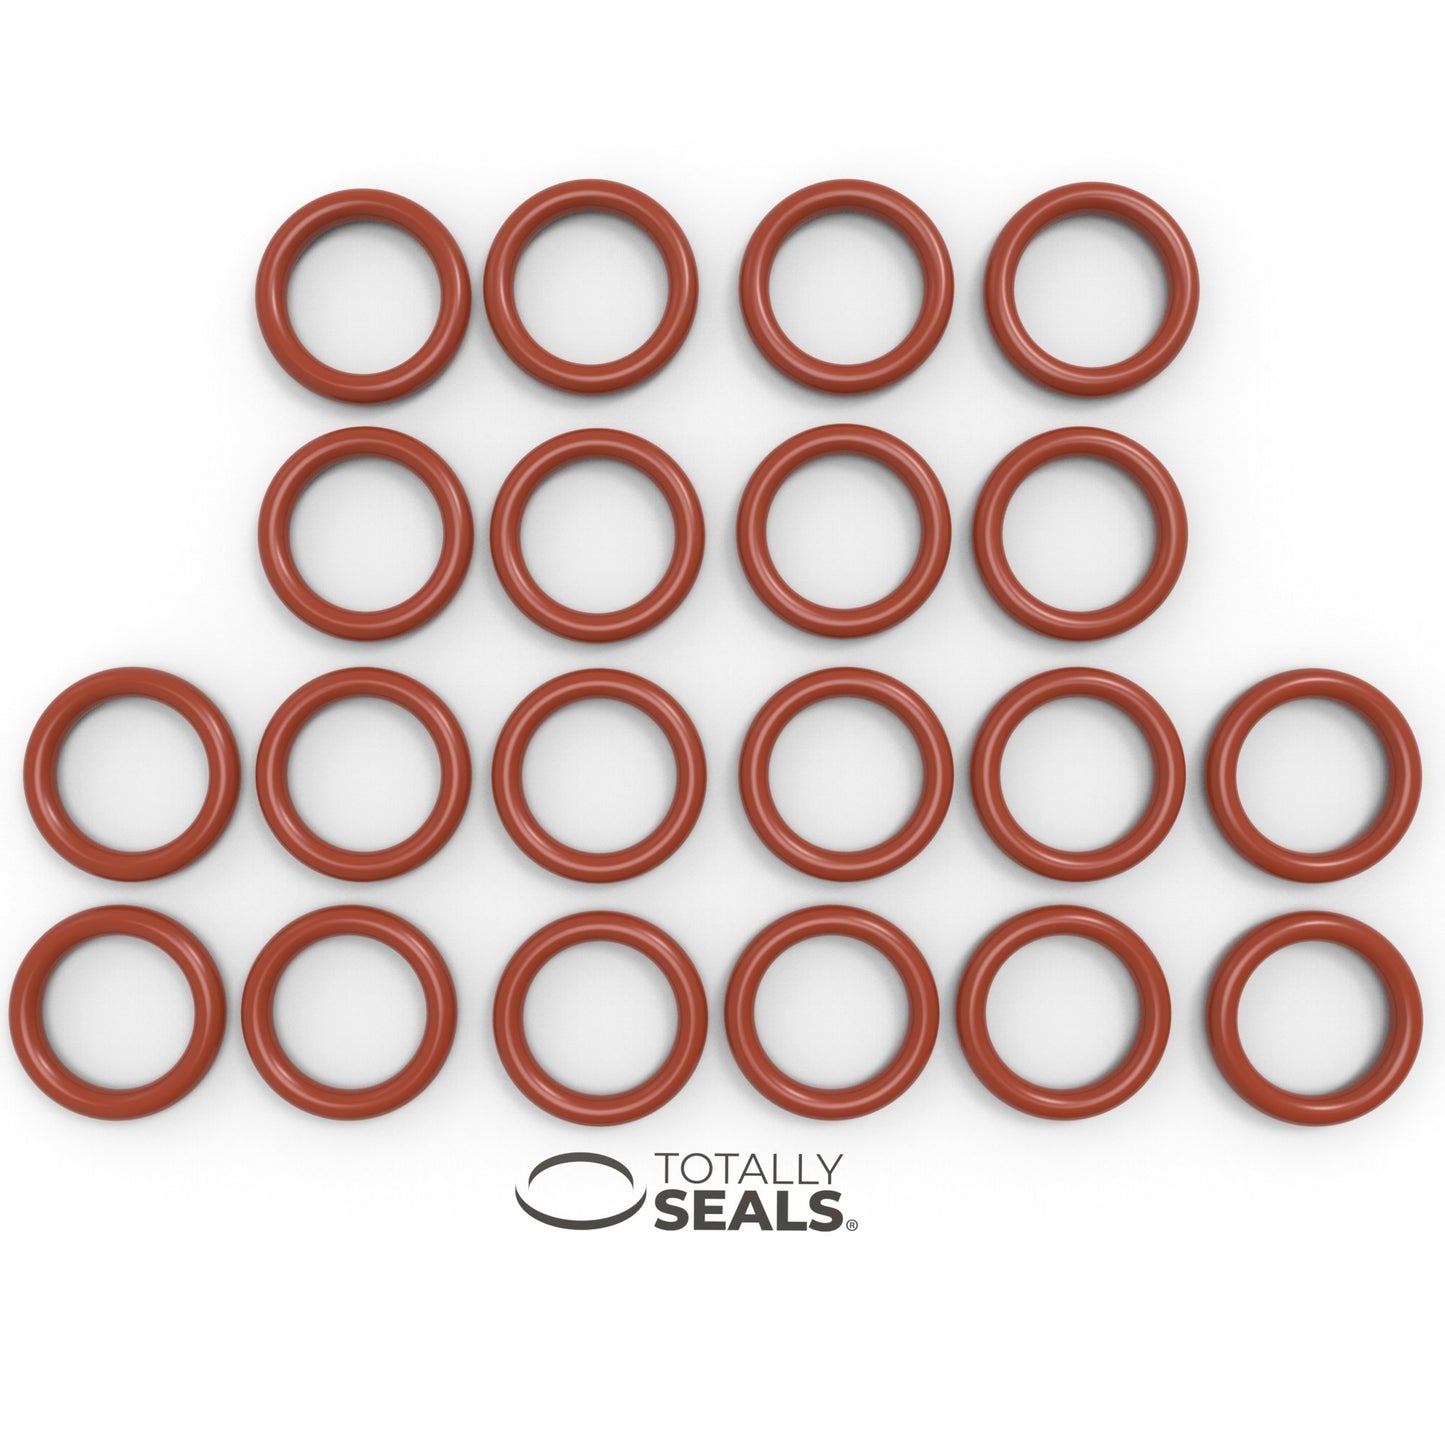 18mm x 3mm (24mm OD) Silicone O-Rings - Totally Seals®